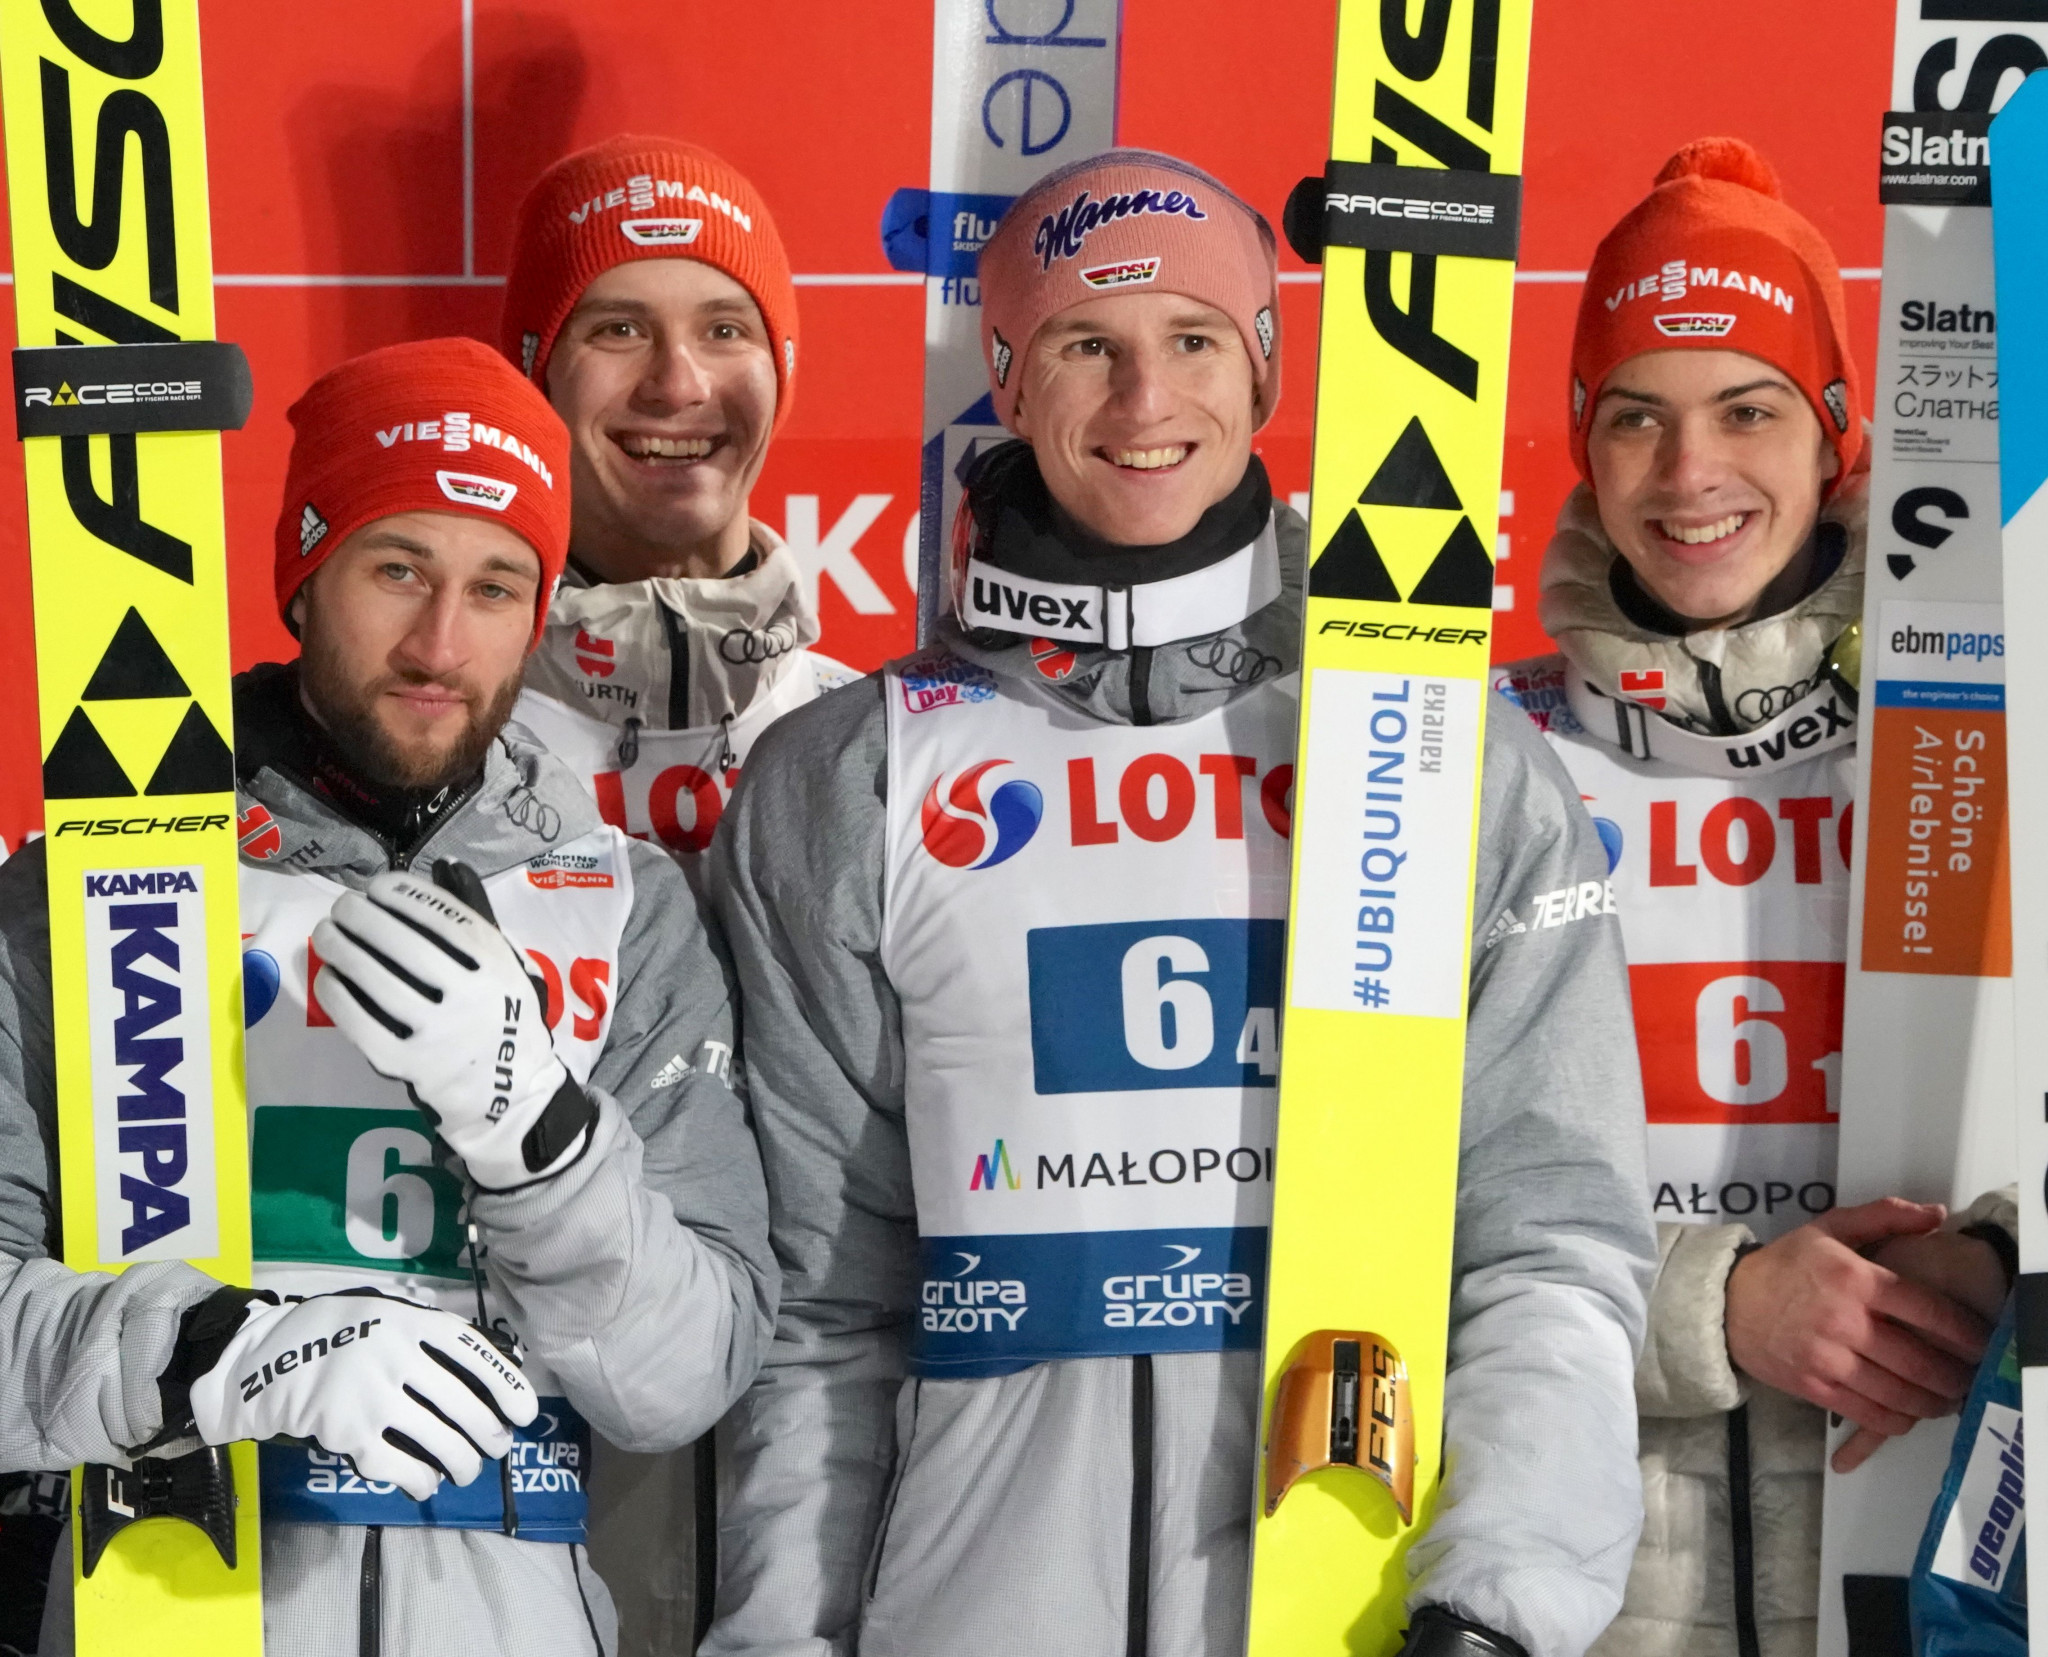 Germany triumph in team event at FIS Ski Jumping World Cup in Zakopane